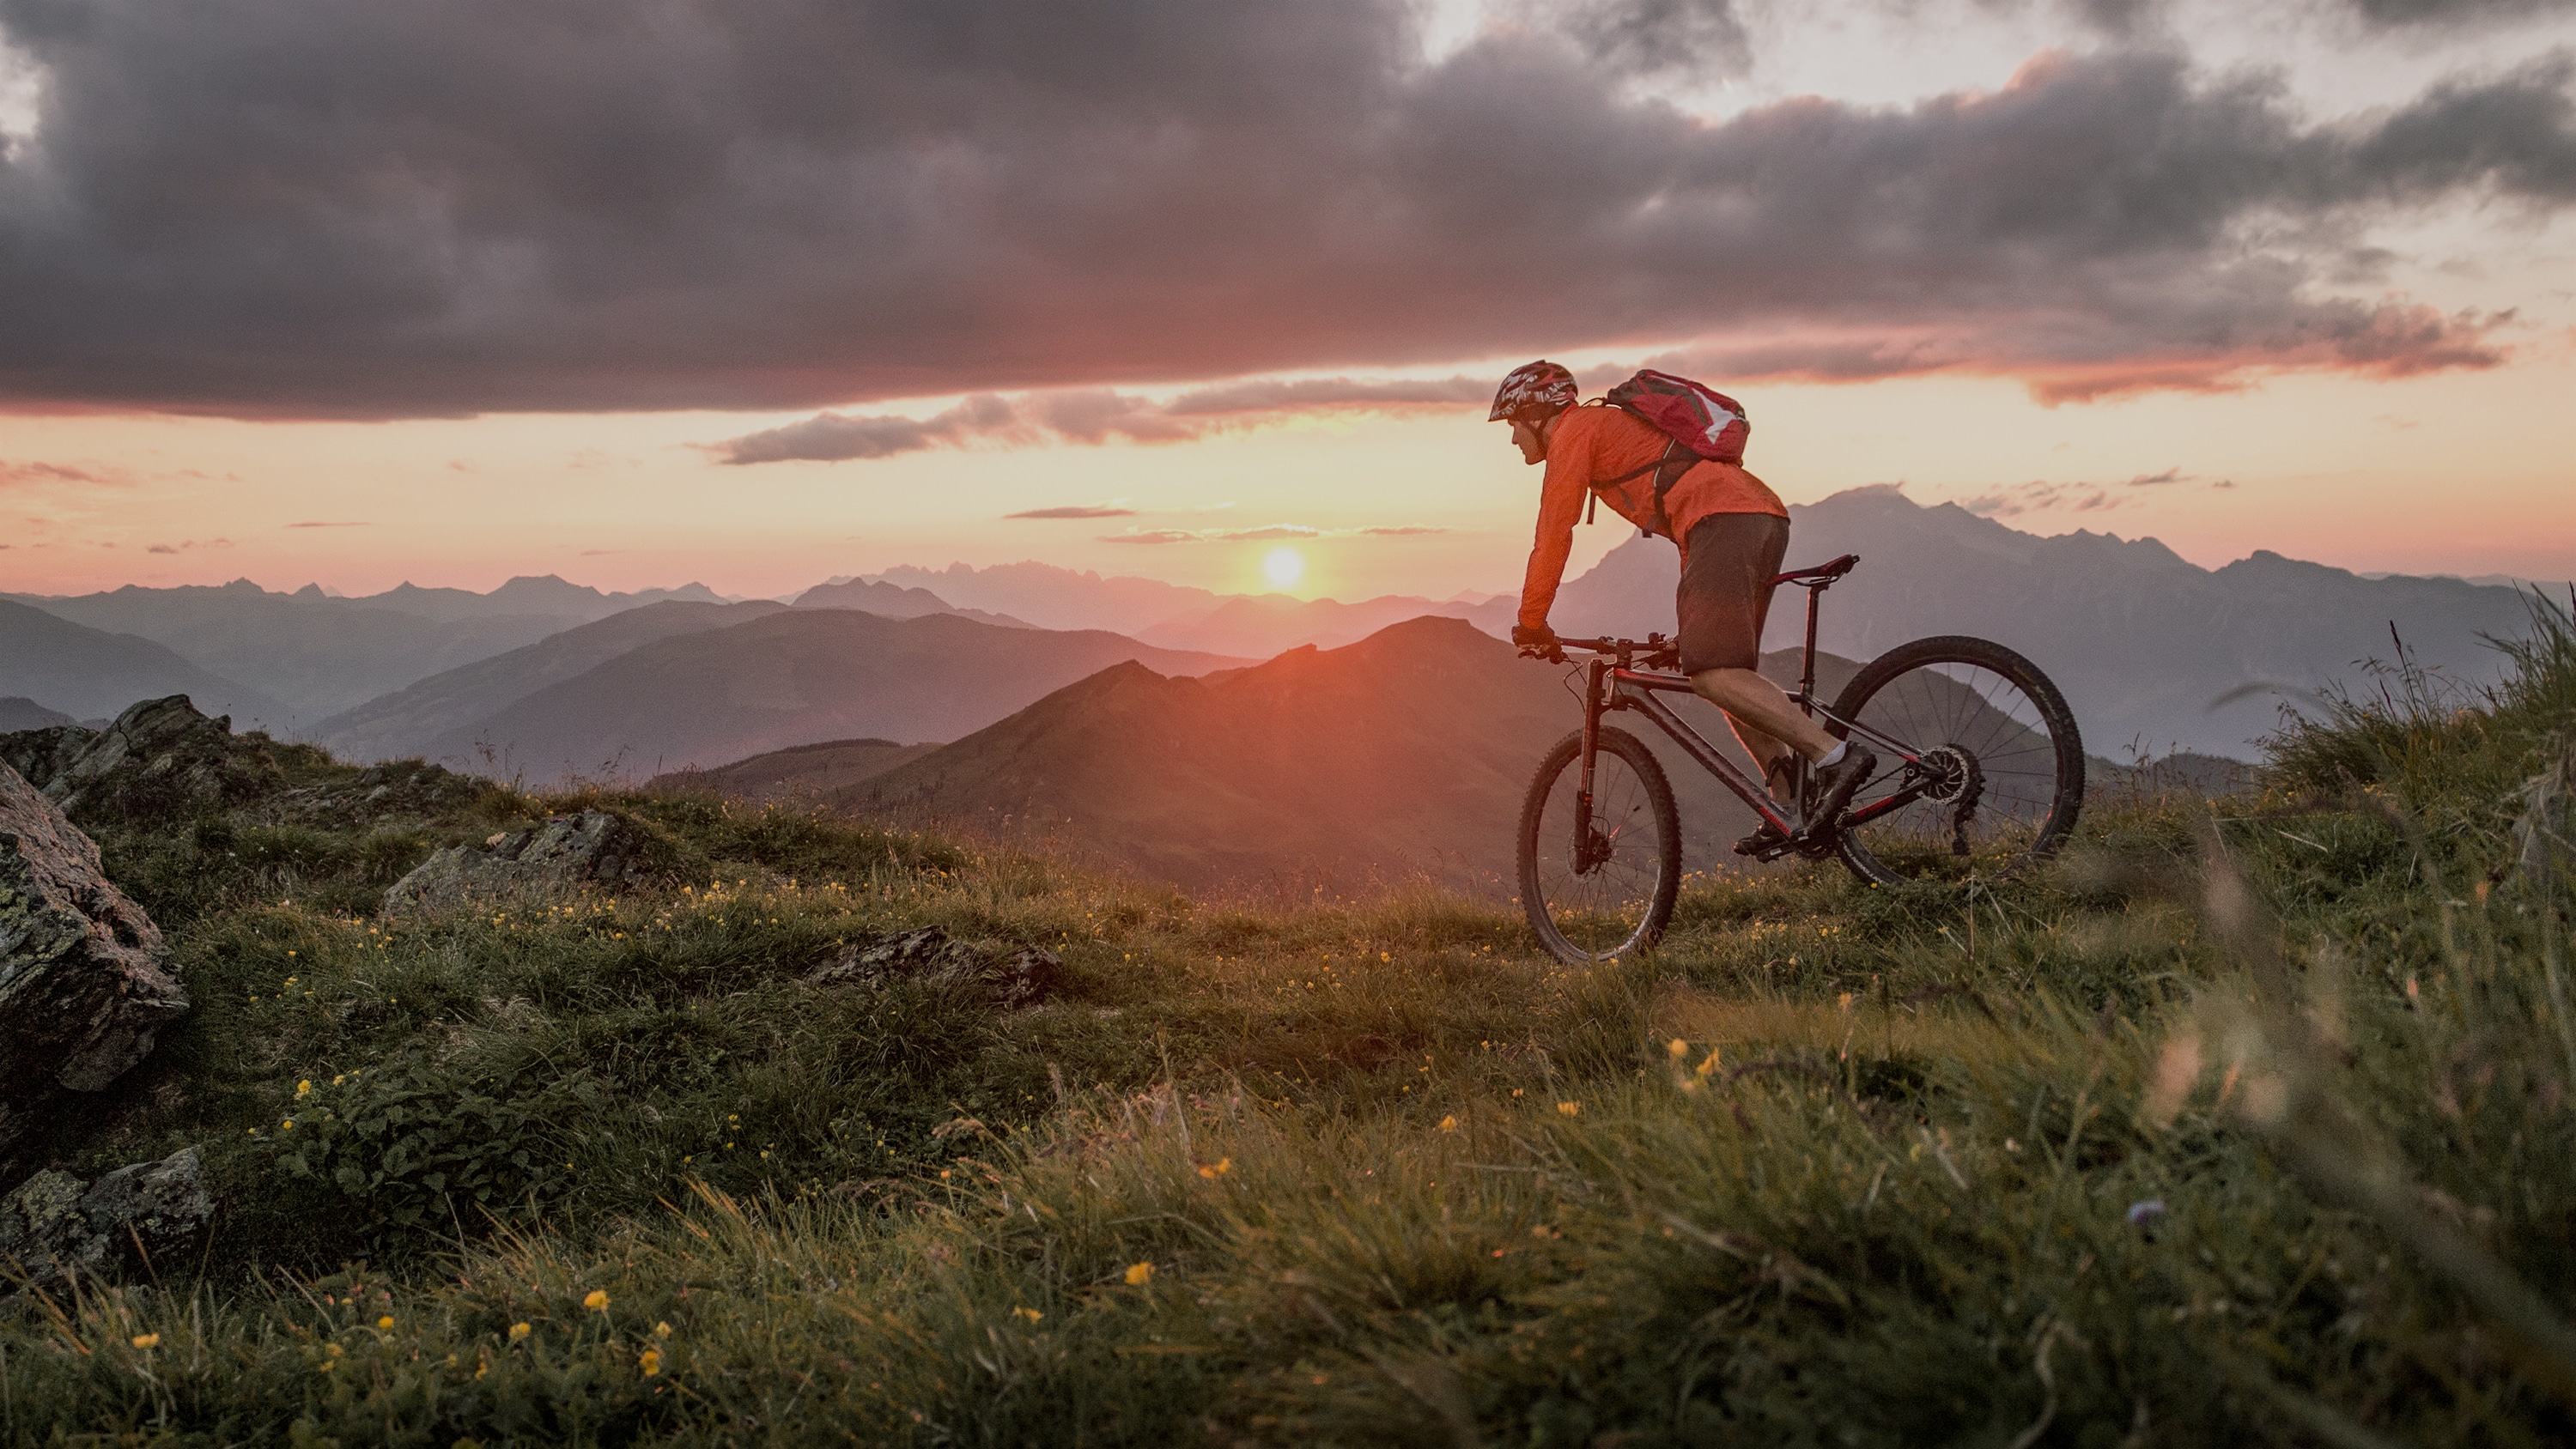 Mountain Biking at Sunset in the Mountains | Outdoor Adventure Image